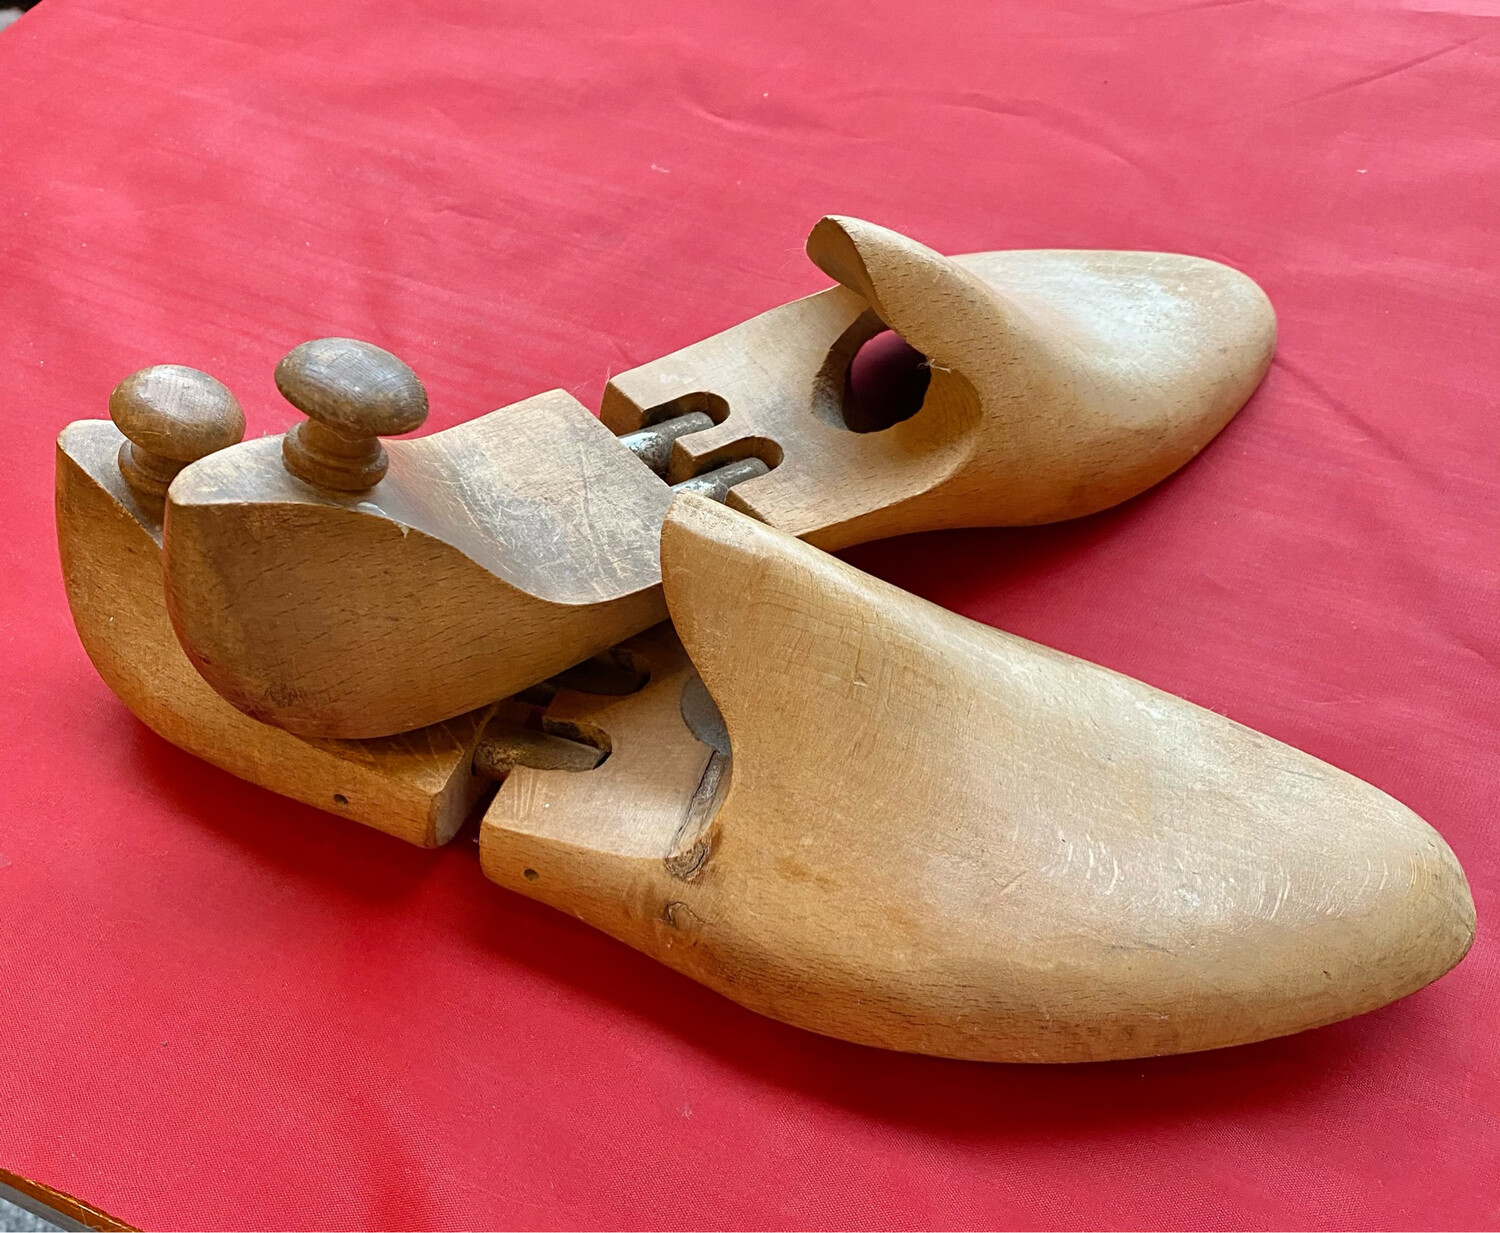 Late 19th C. French Shoe Stretchers In Lovely Condition - Practical Or Decorative